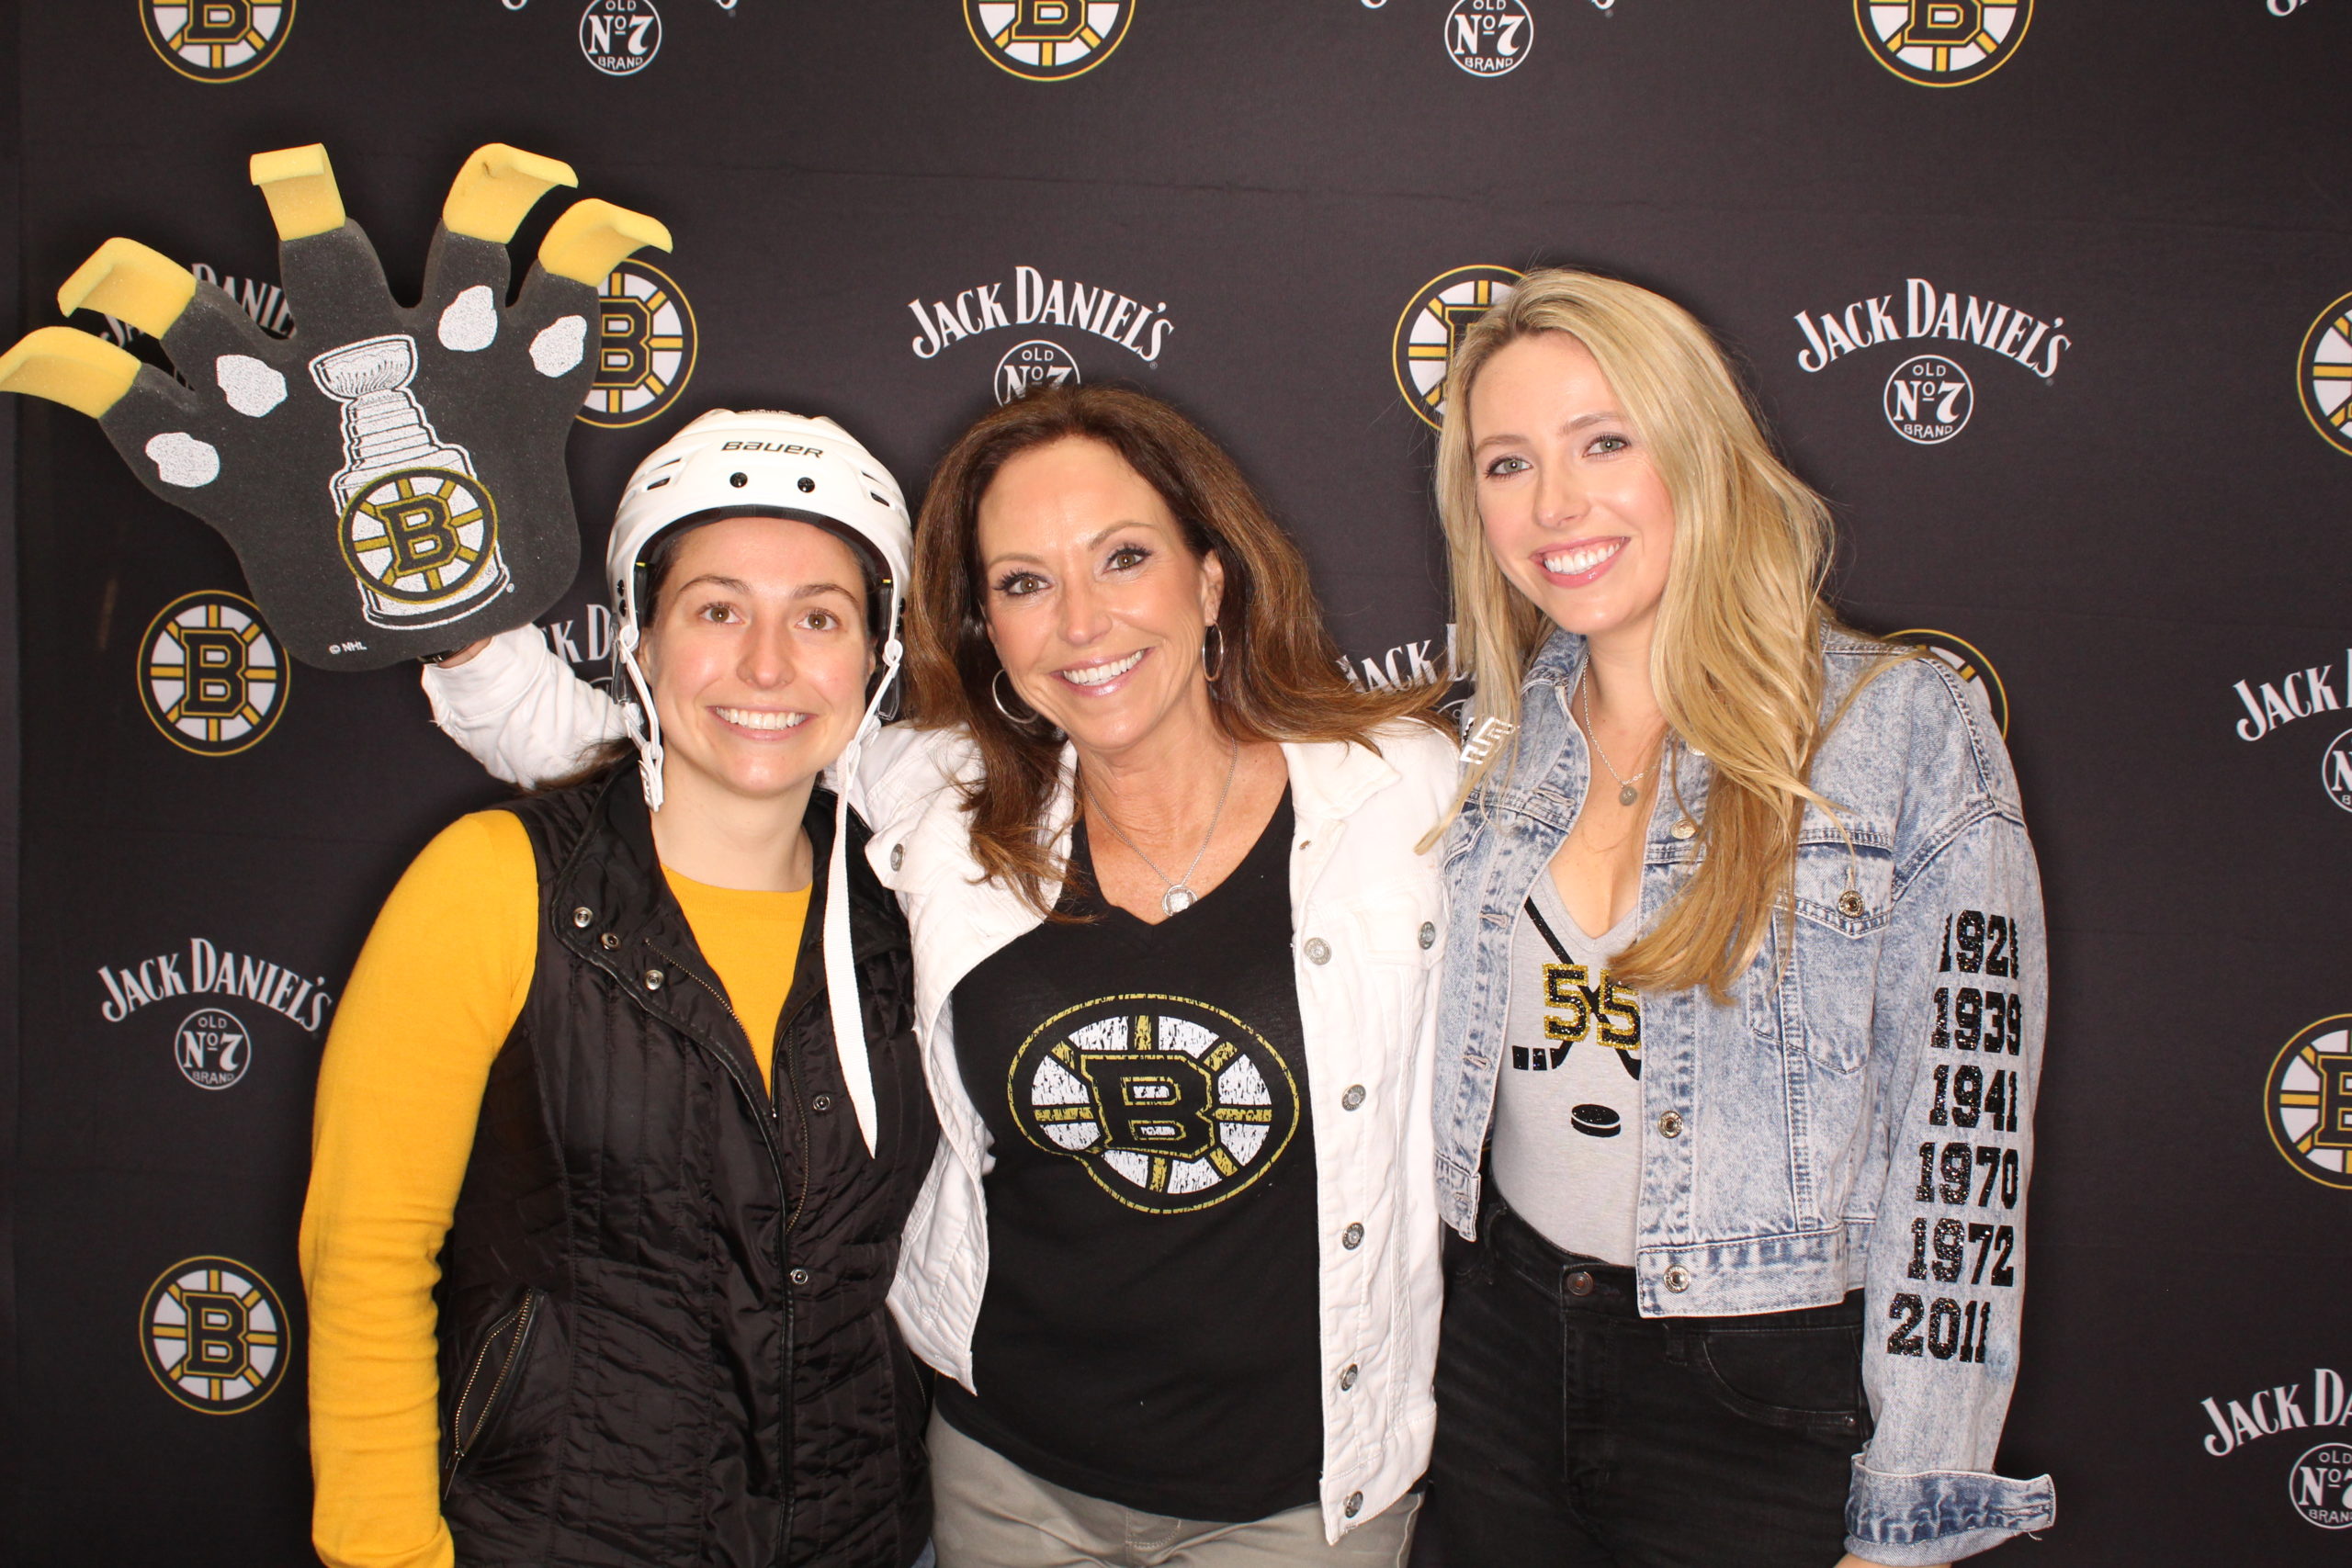 Three women wearing Bruins props posing for a photo in the Jack Daniel's/Bruins branded backdrop photo booth